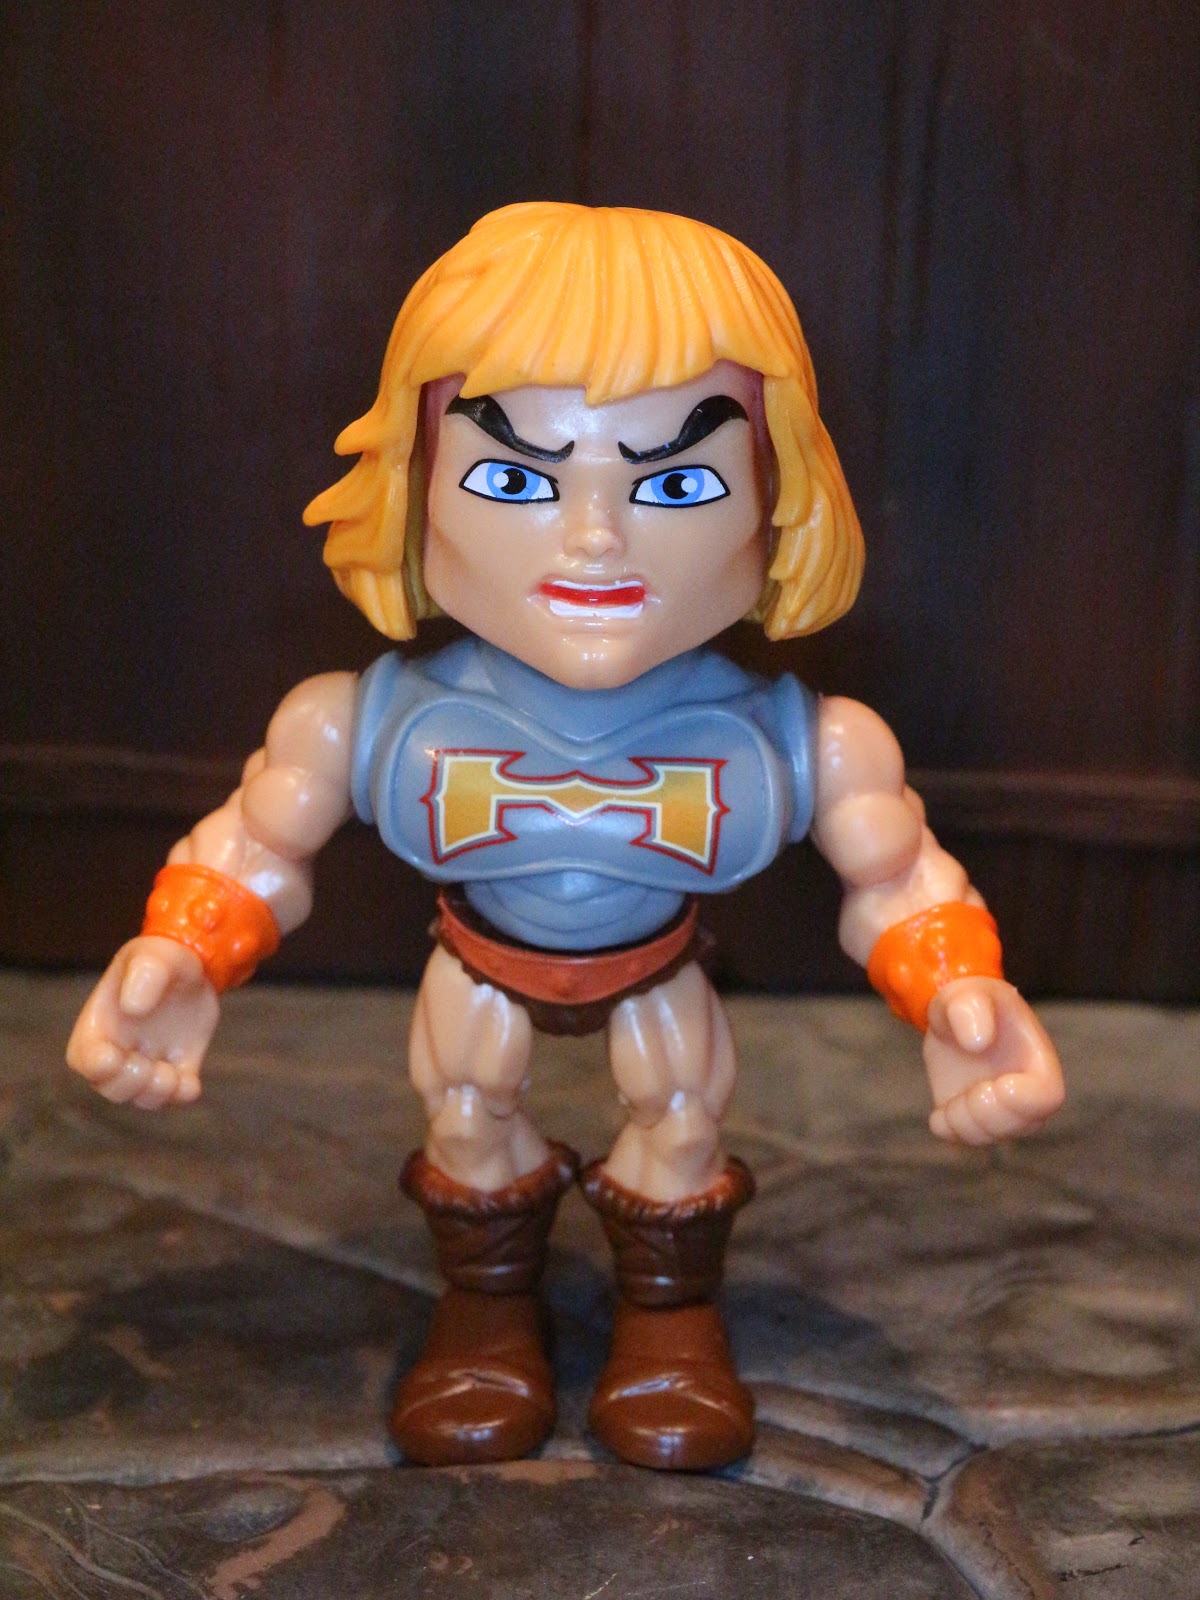 Battle Armor He-ManThe Loyal Subjects Masters of the Universe MOTU Figure 